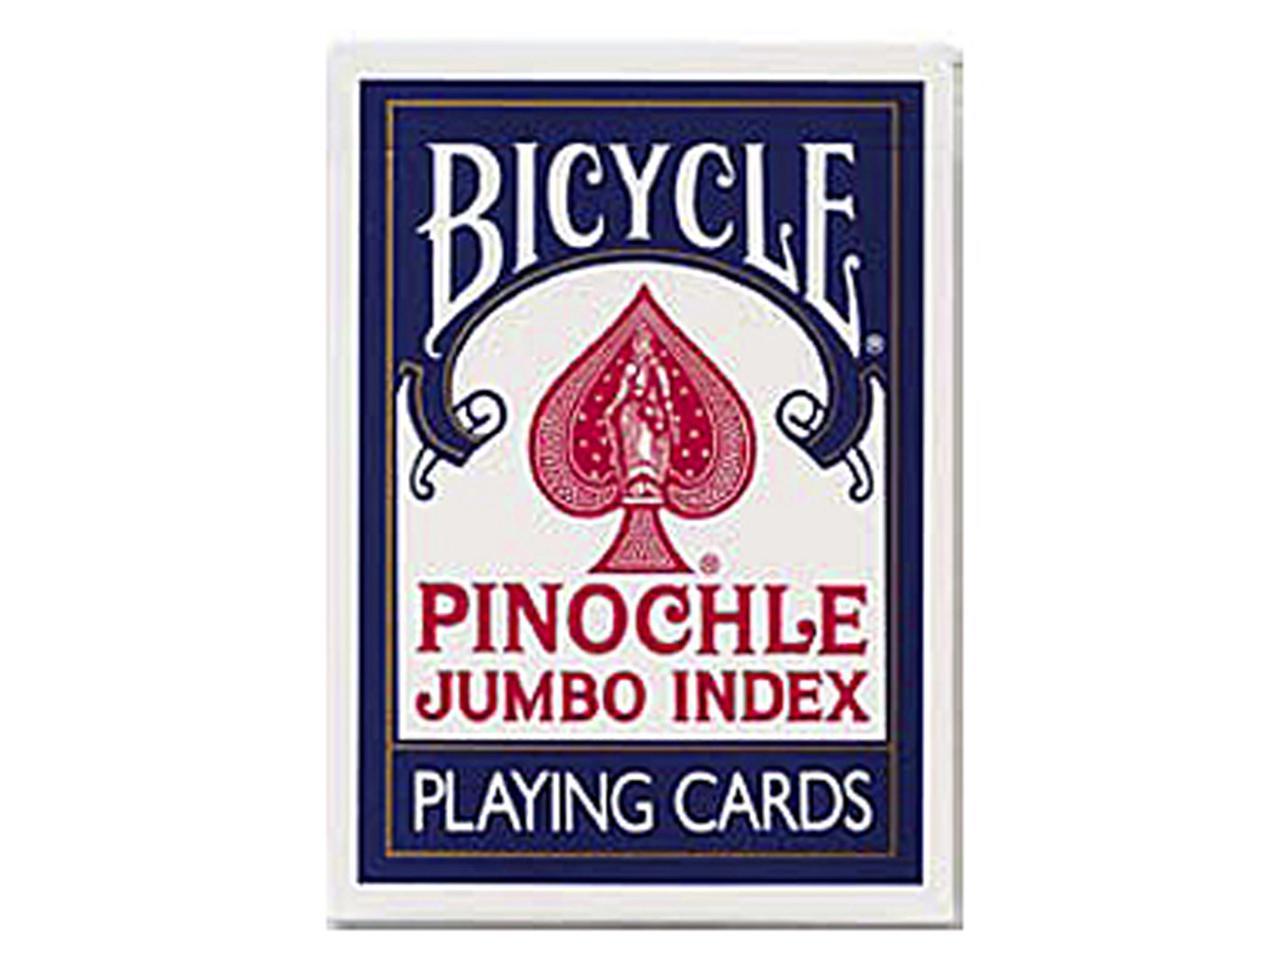 PINOCHLE PLAYING CARDS-AVIATOR Cincinnati by The United States Playing Card Co Ohio 12pk 